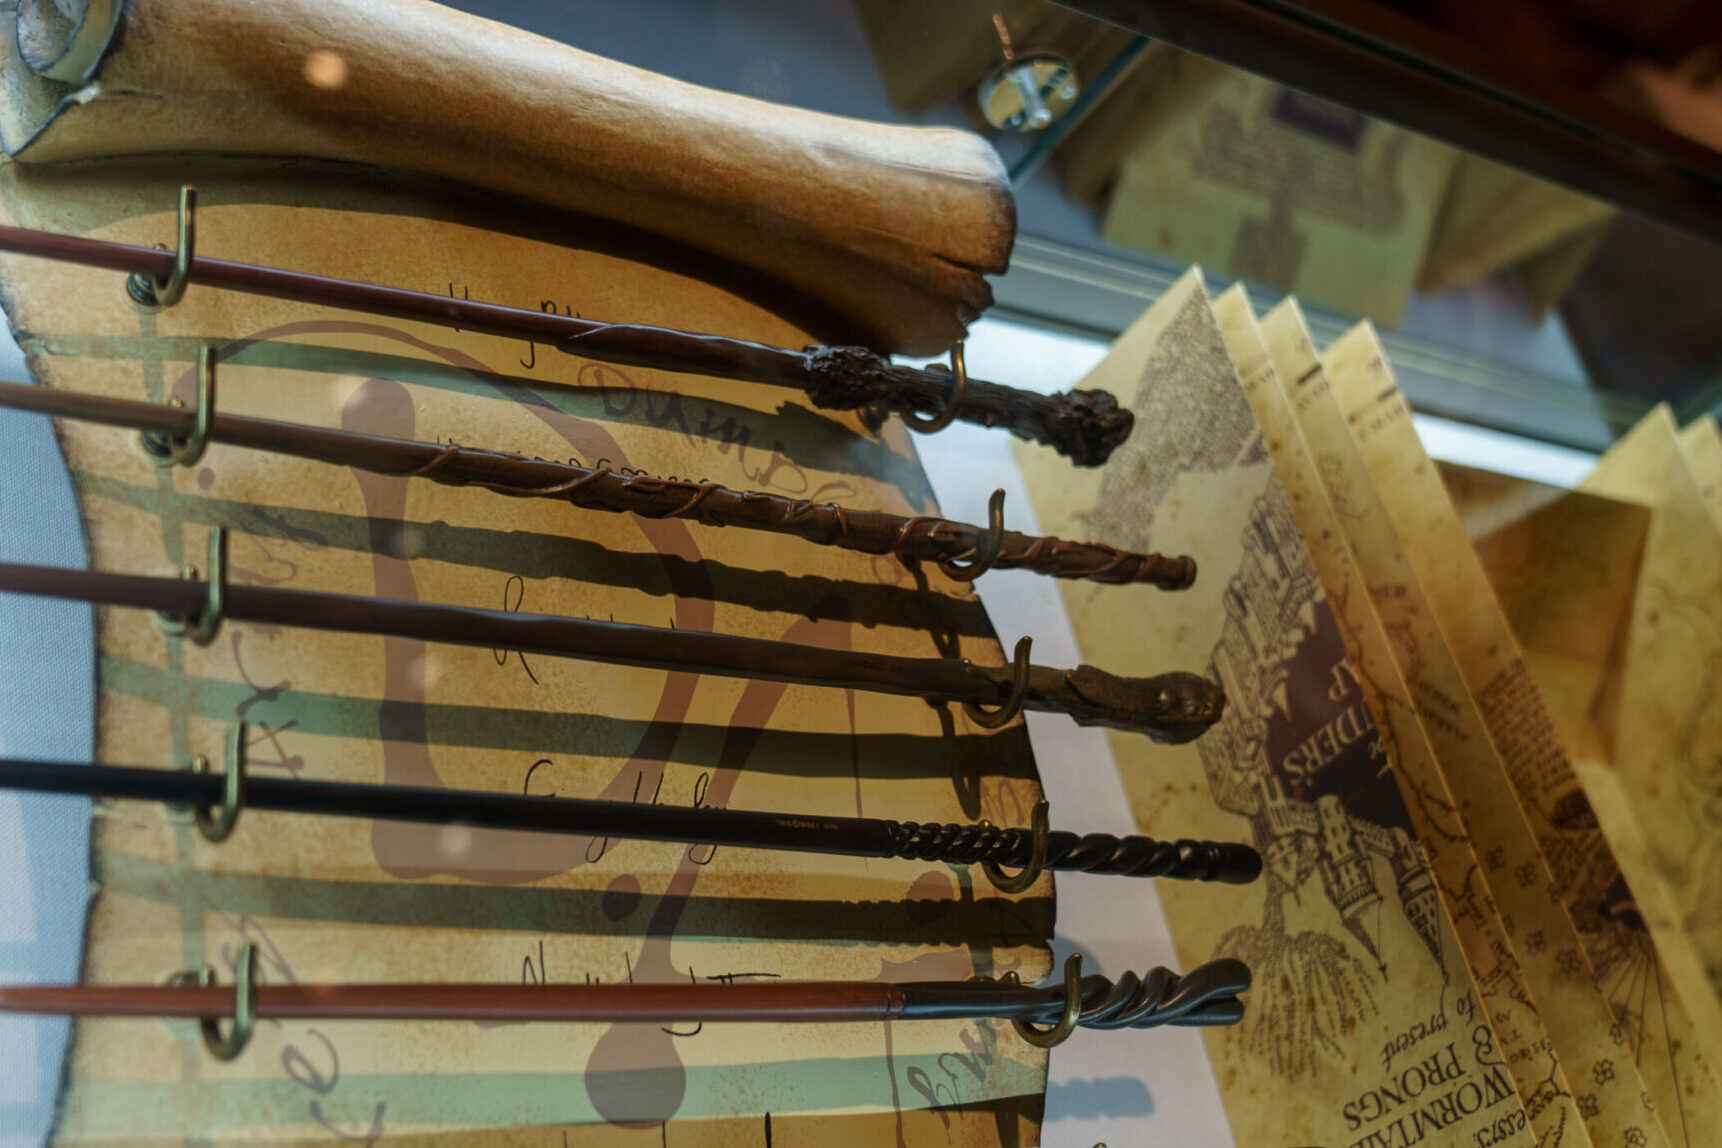 Wands and Marauders Map at Harry Potter Shop New York